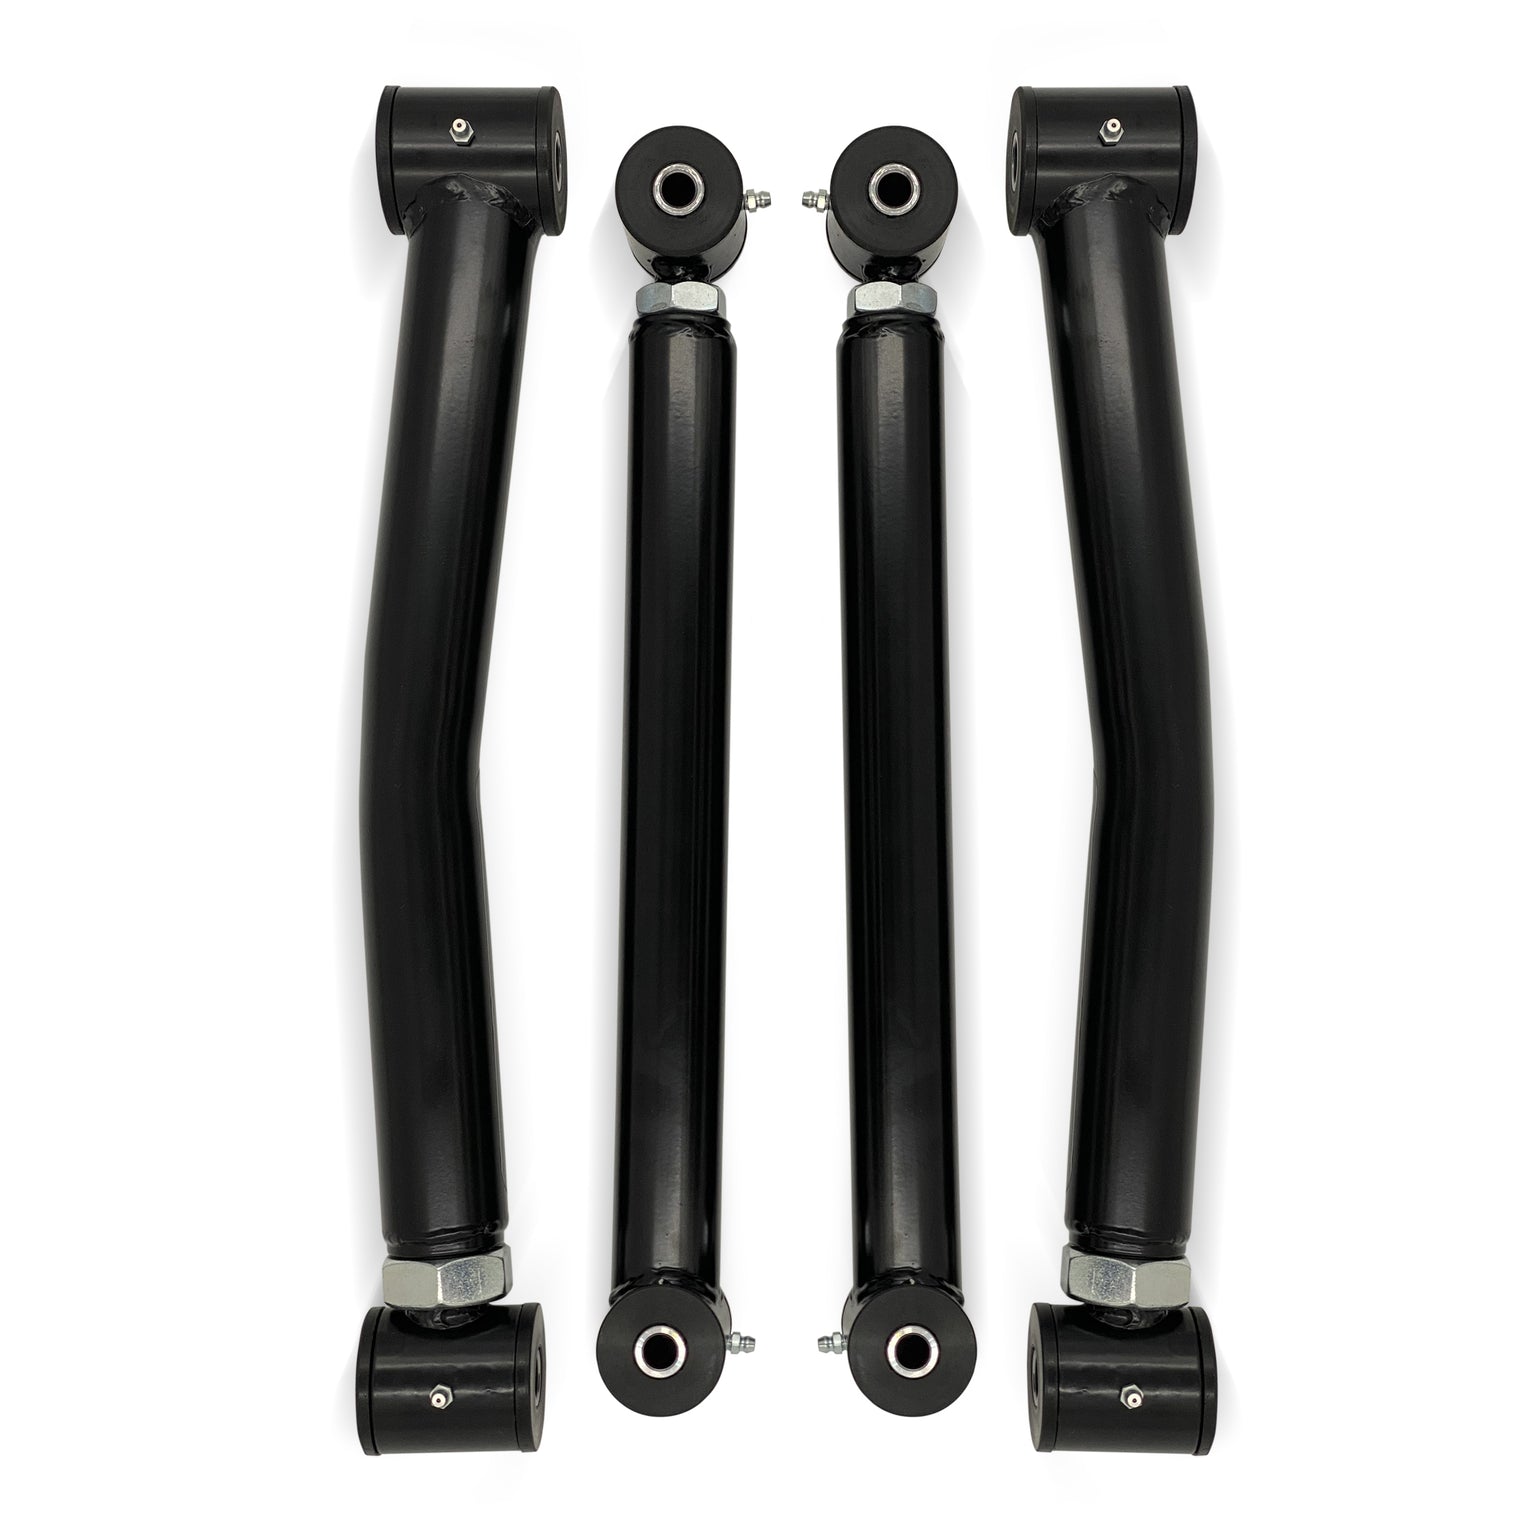 2000-2001 Dodge Ram 1500 High Clearance Adjustable Control Arms - Apoc Industries